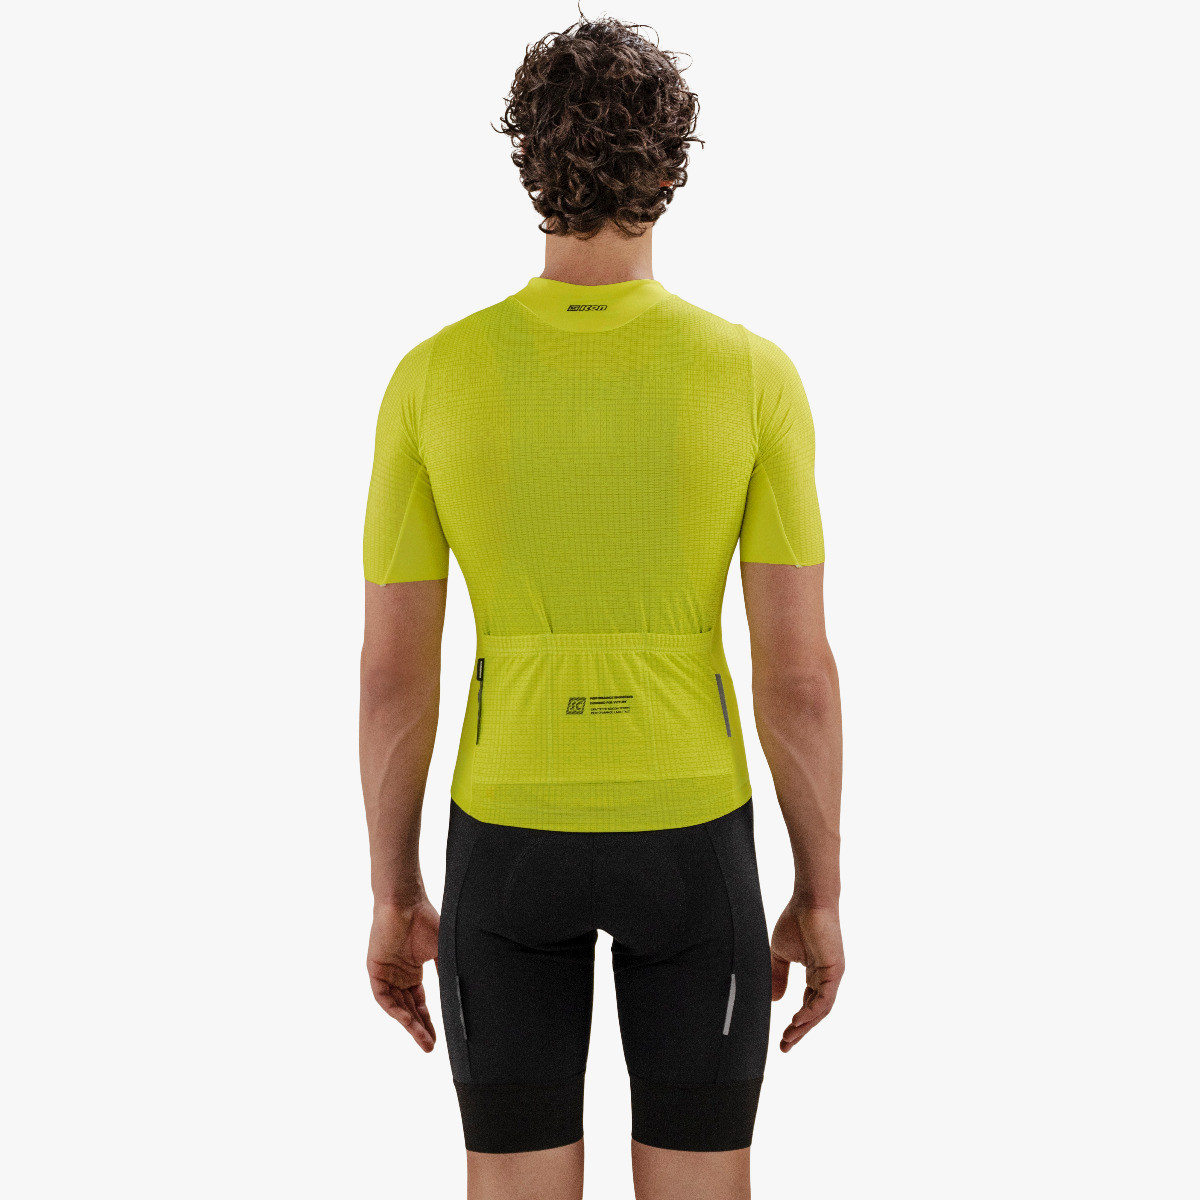 cycling jersey x-over 9.5 summer  short sleeve yellow fluo scicon cj11010